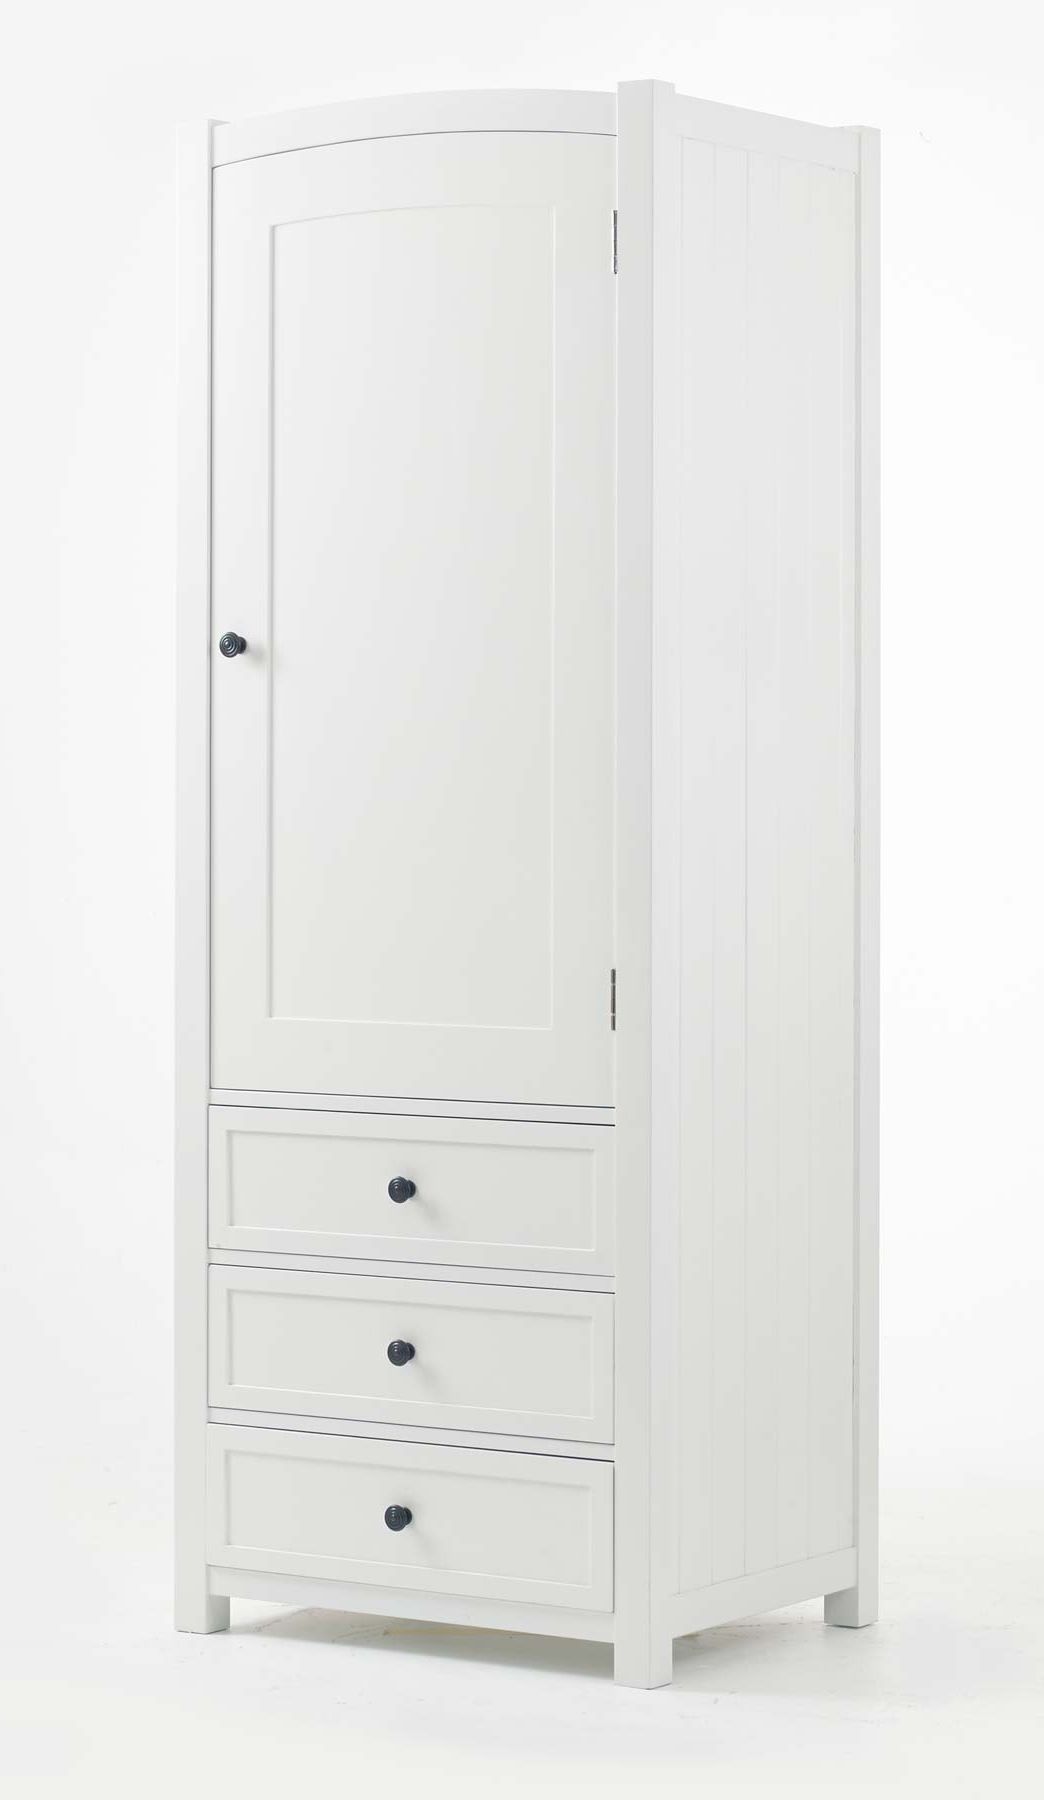 Children's White Solid Wood Single Wardrobe With Drawers Throughout Well Known Single White Wardrobes With Drawers (View 3 of 15)